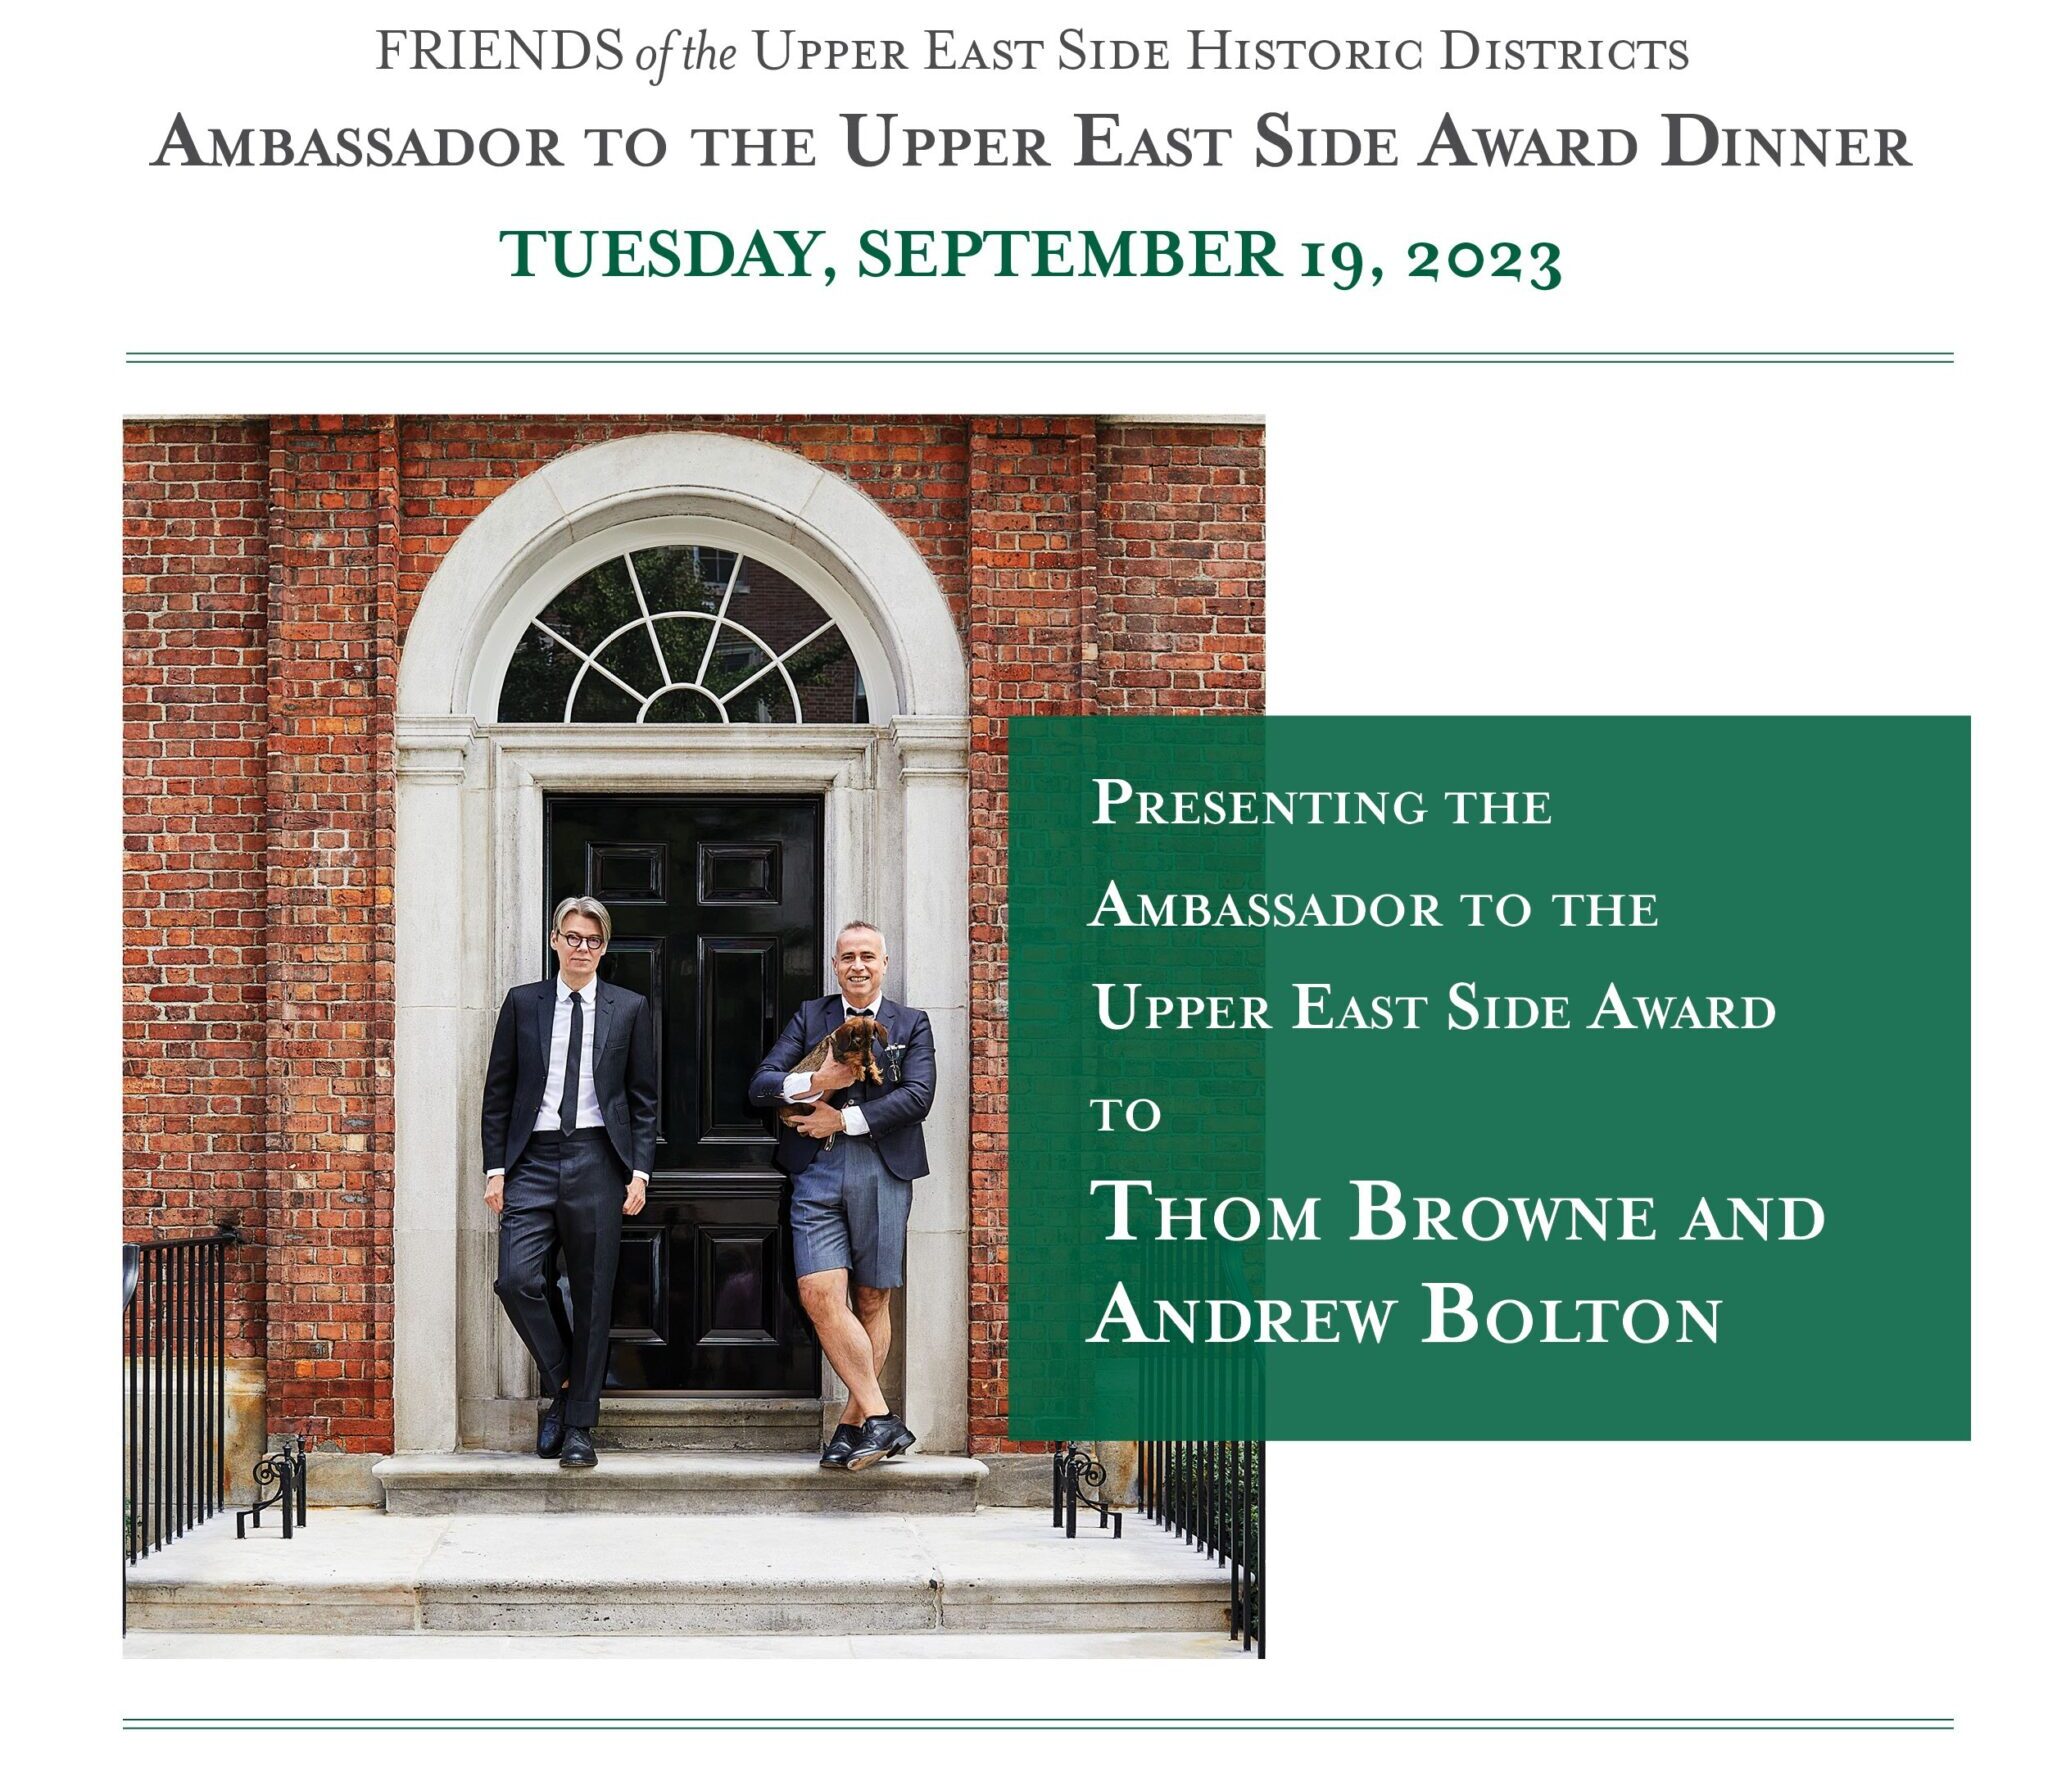 Save the date! FRIENDS of the Upper East Side Historic Districts Ambassador to the Upper East Side Award Dinner, Tuesday, September 19, 2023. Presenting the Ambassador to the Upper East Side Award to Thom Browne and Andrew Bolton. Image courtesy of Architectural Digest. Photo by William Abranowicz. Layout by Betsy Blazar. 